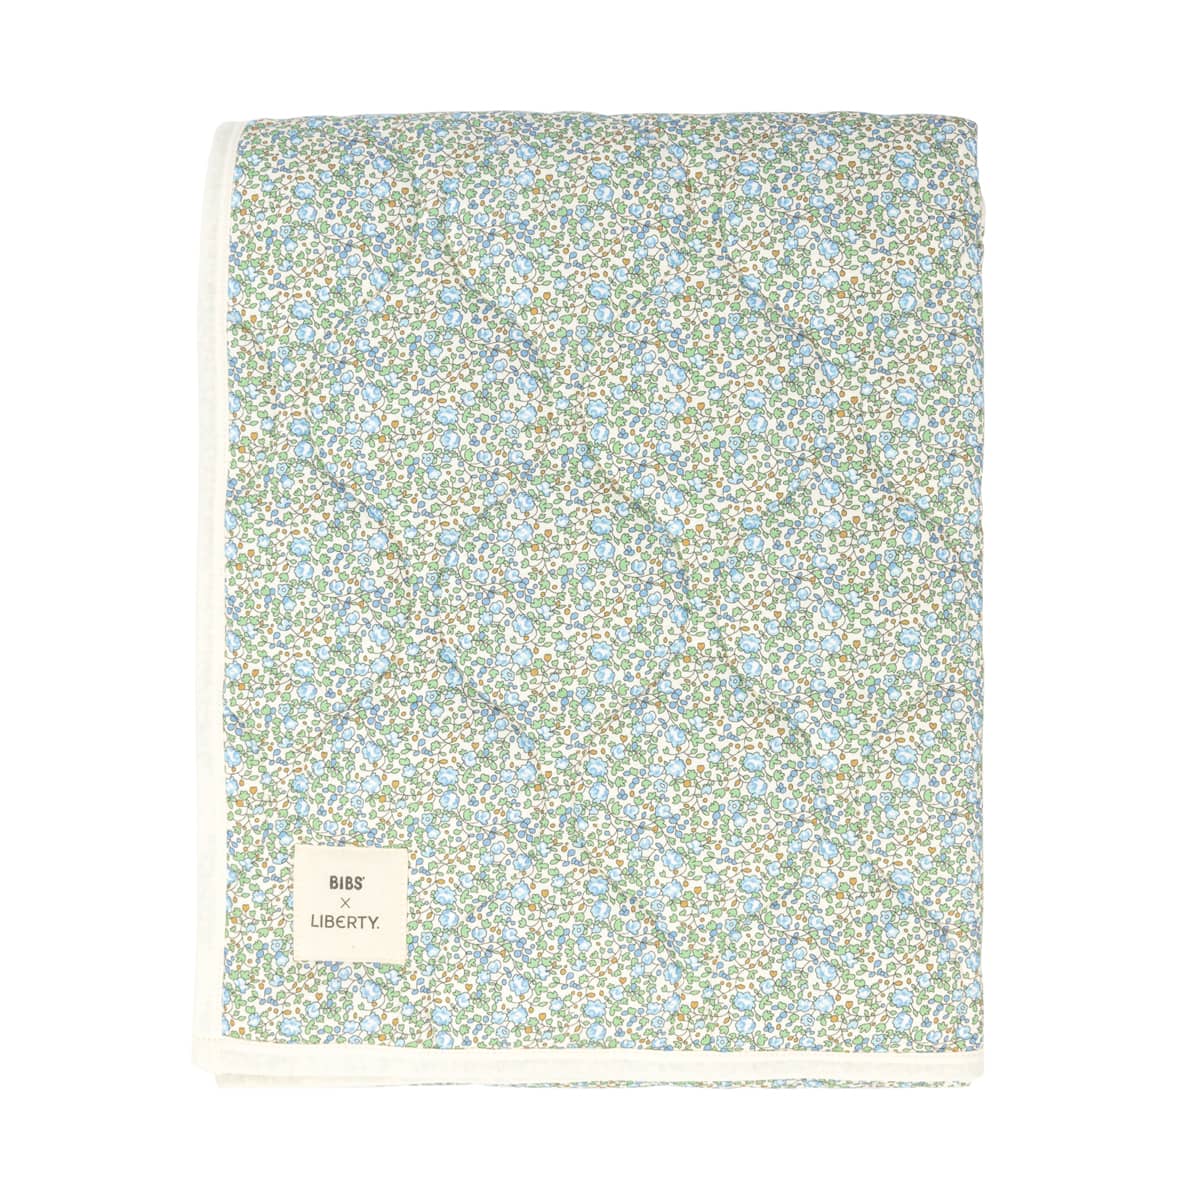 BIBS x LIBERTY Quilted Blanket - Eloise / Ivory